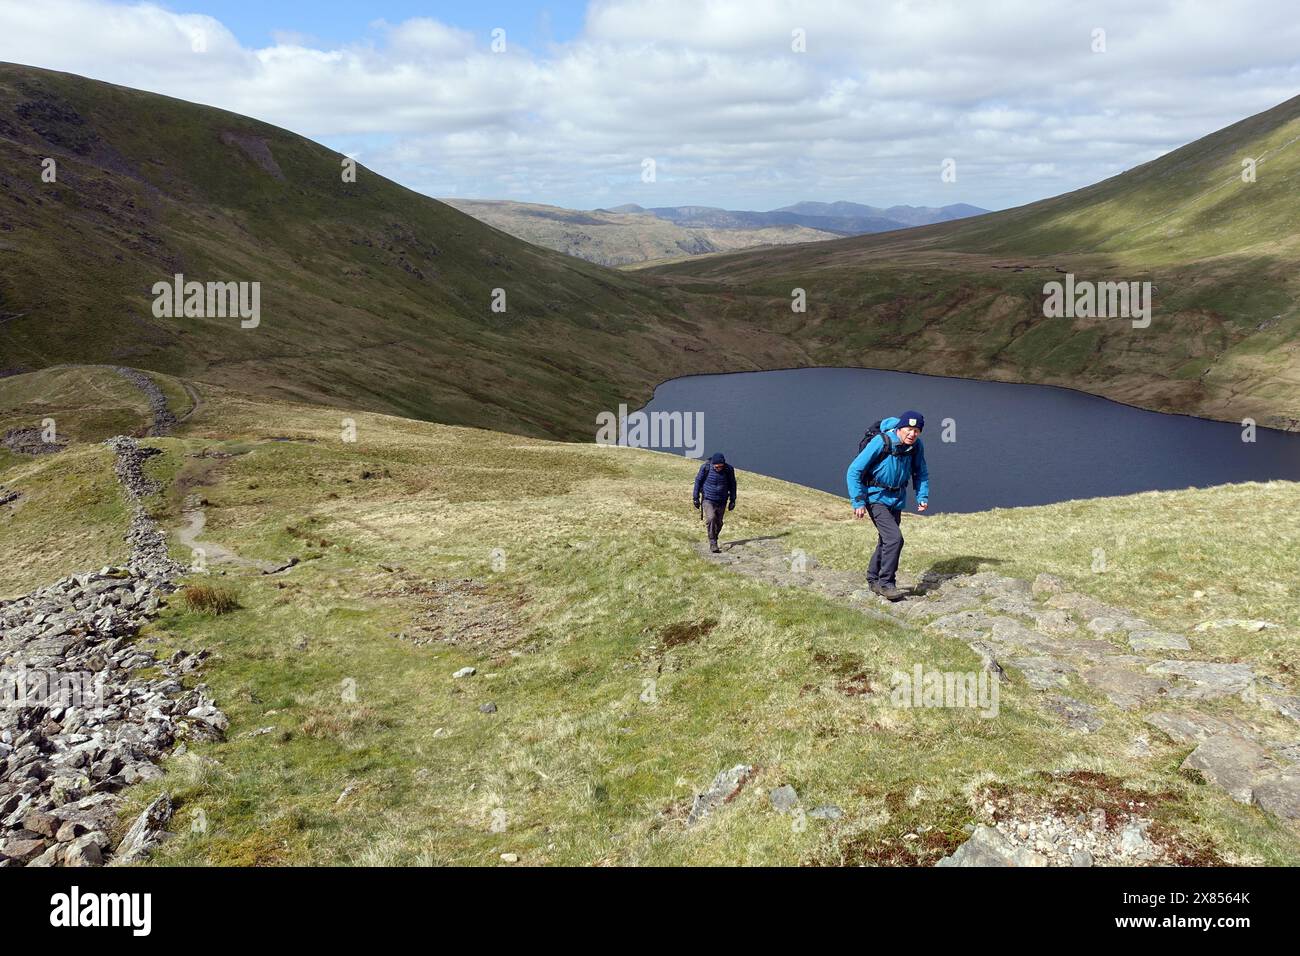 Two Men (Hikers) Walking up the Wainwright 'Fairfield' from Grisedale Hause above Grisedale Tarn in the Lake District National Park, Cumbria, England Stock Photo